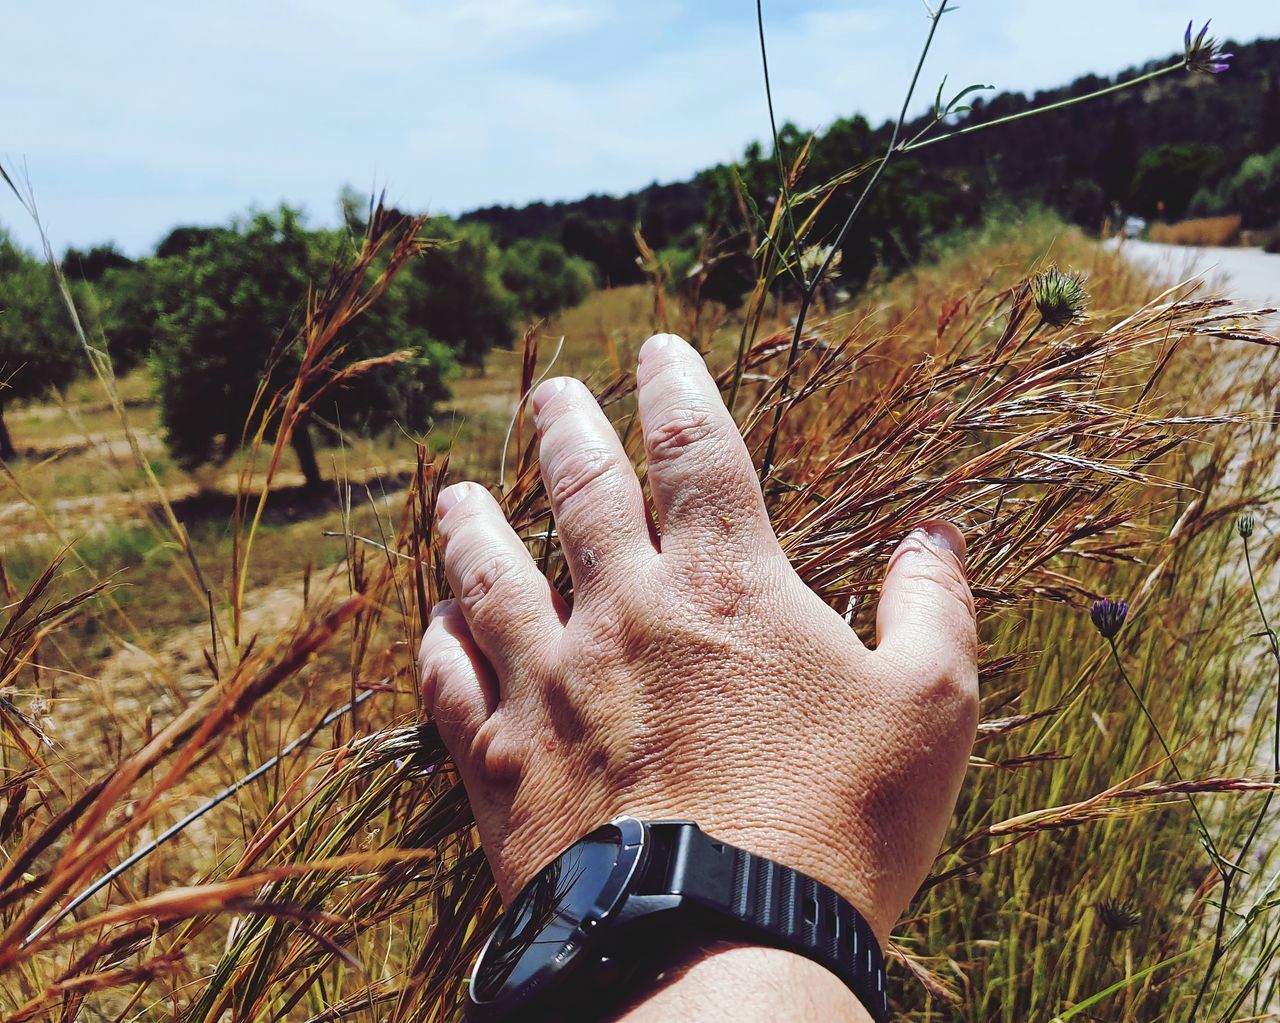 grass, personal perspective, hand, nature, plant, one person, tree, watch, soil, land, sky, leisure activity, day, adult, lifestyles, landscape, outdoors, environment, close-up, focus on foreground, field, women, finger